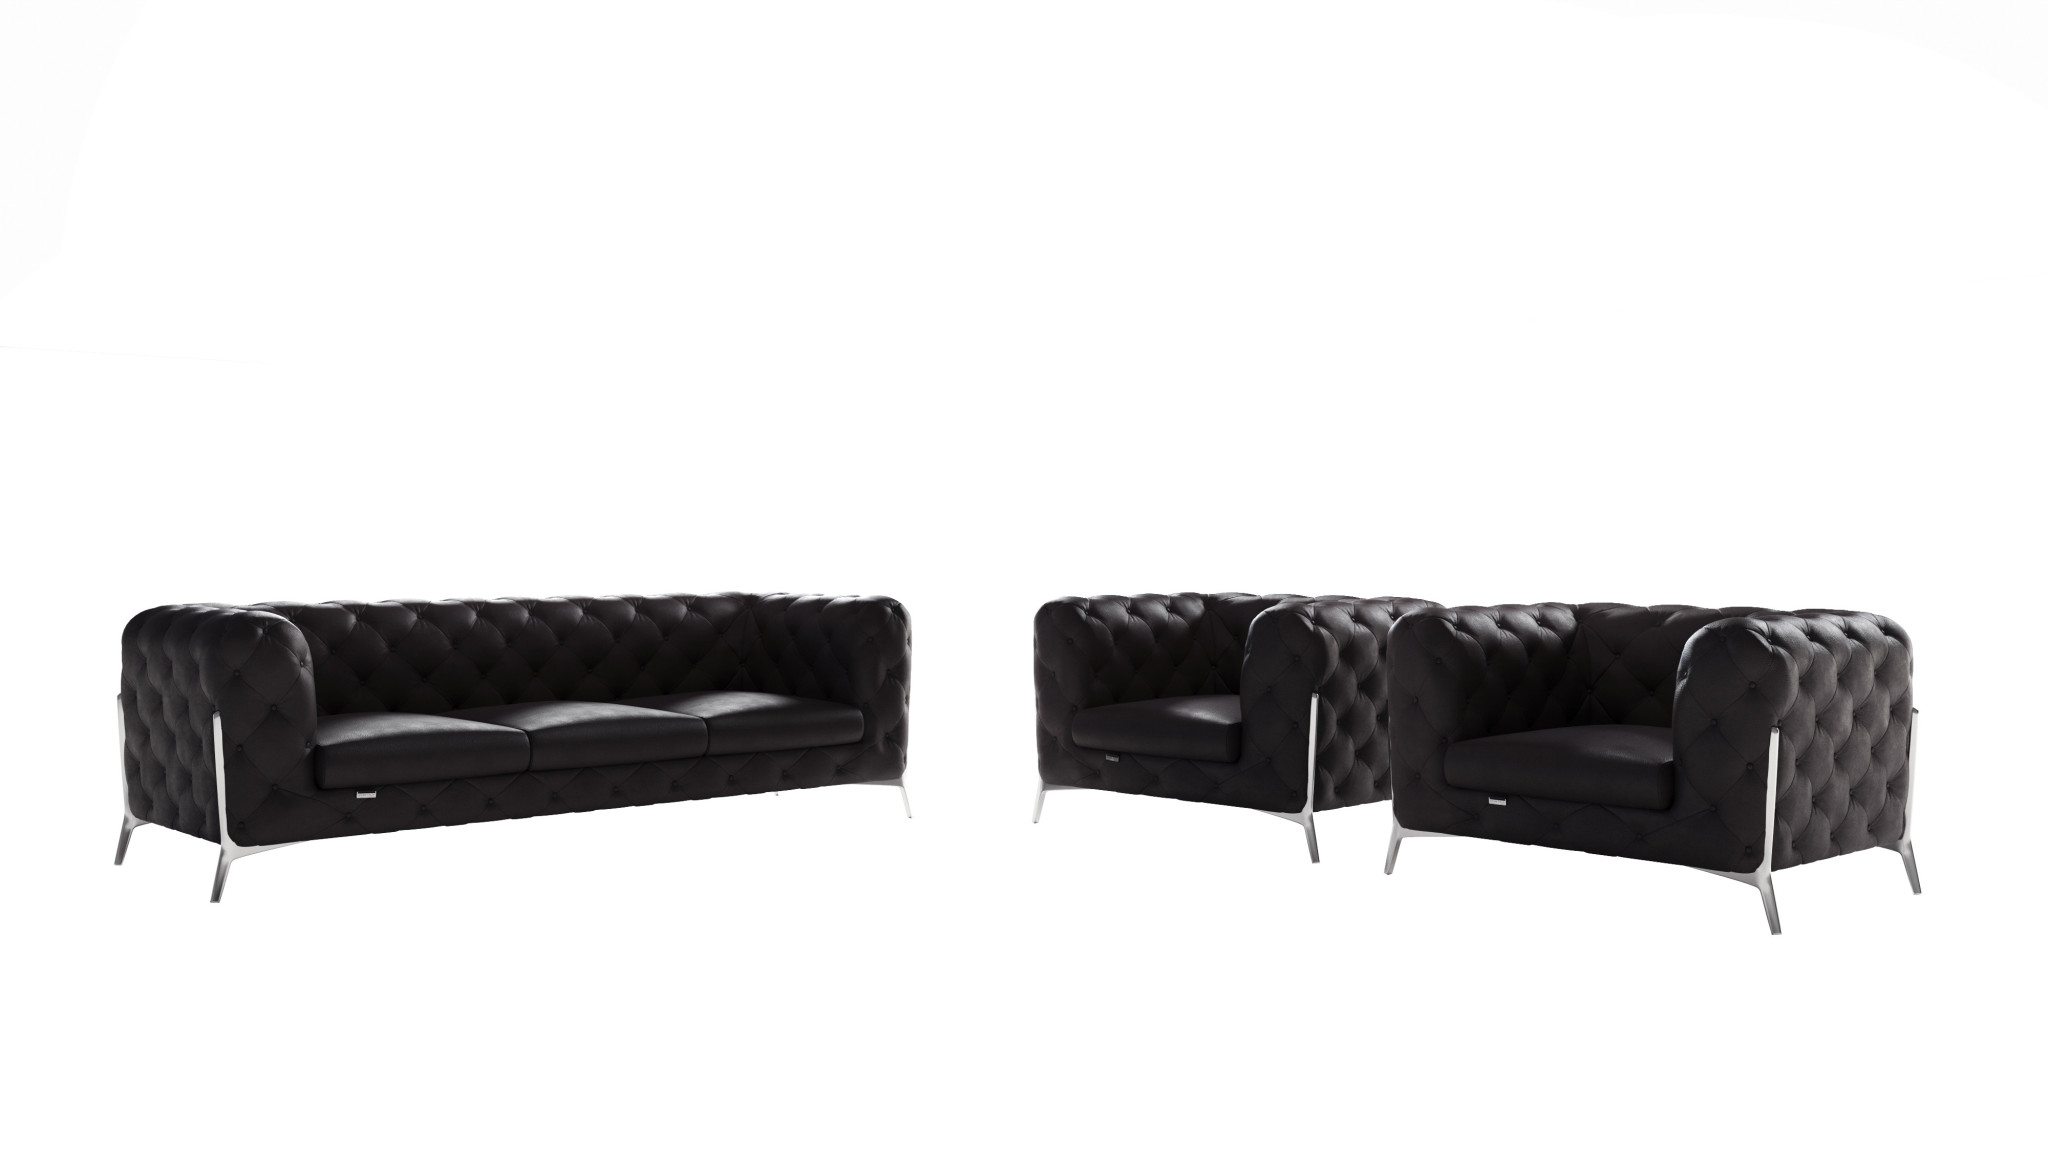 Three Piece Indoor Black Italian Leather Five Person Seating Set-476571-1